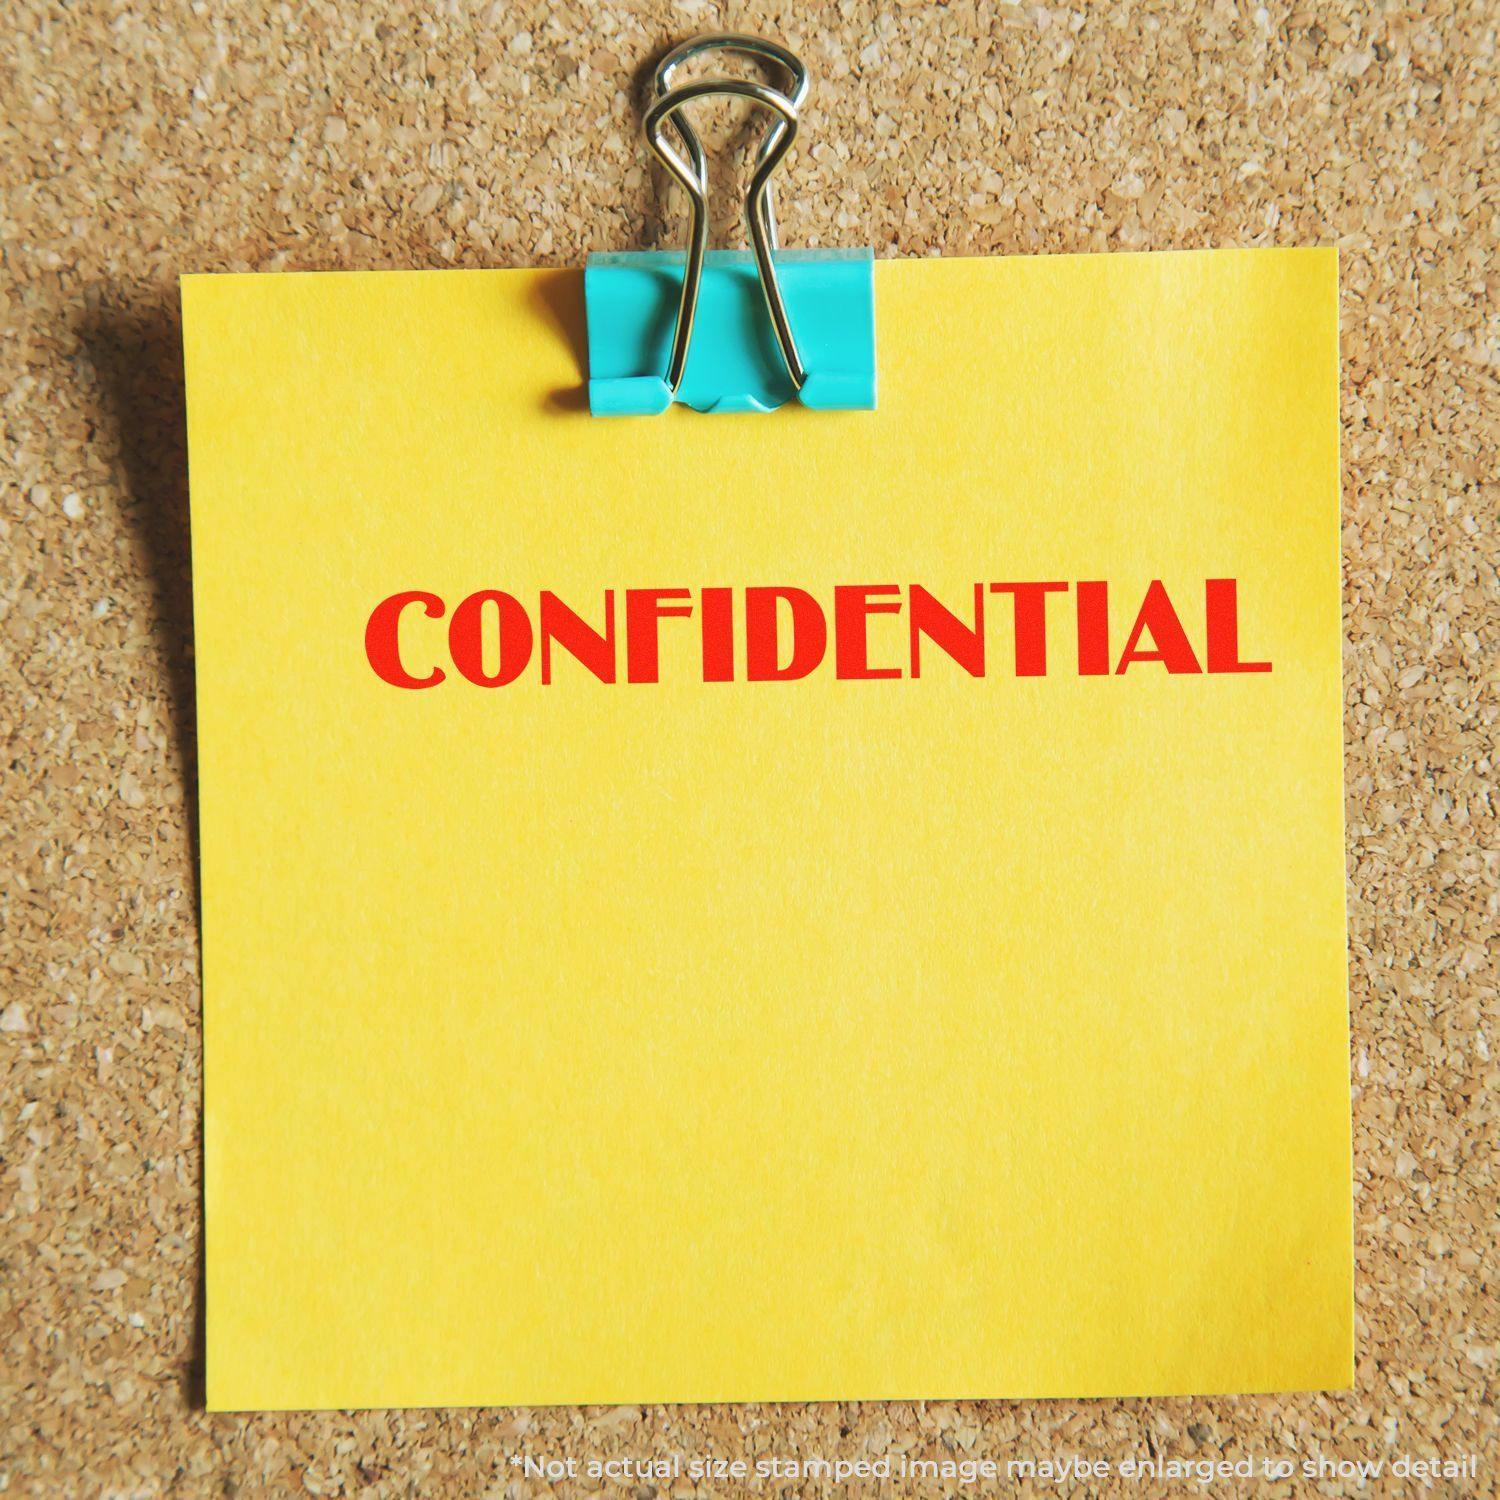 A stock office rubber stamp with a stamped image showing how the text "CONFIDENTIAL" in an optima font is displayed after stamping.